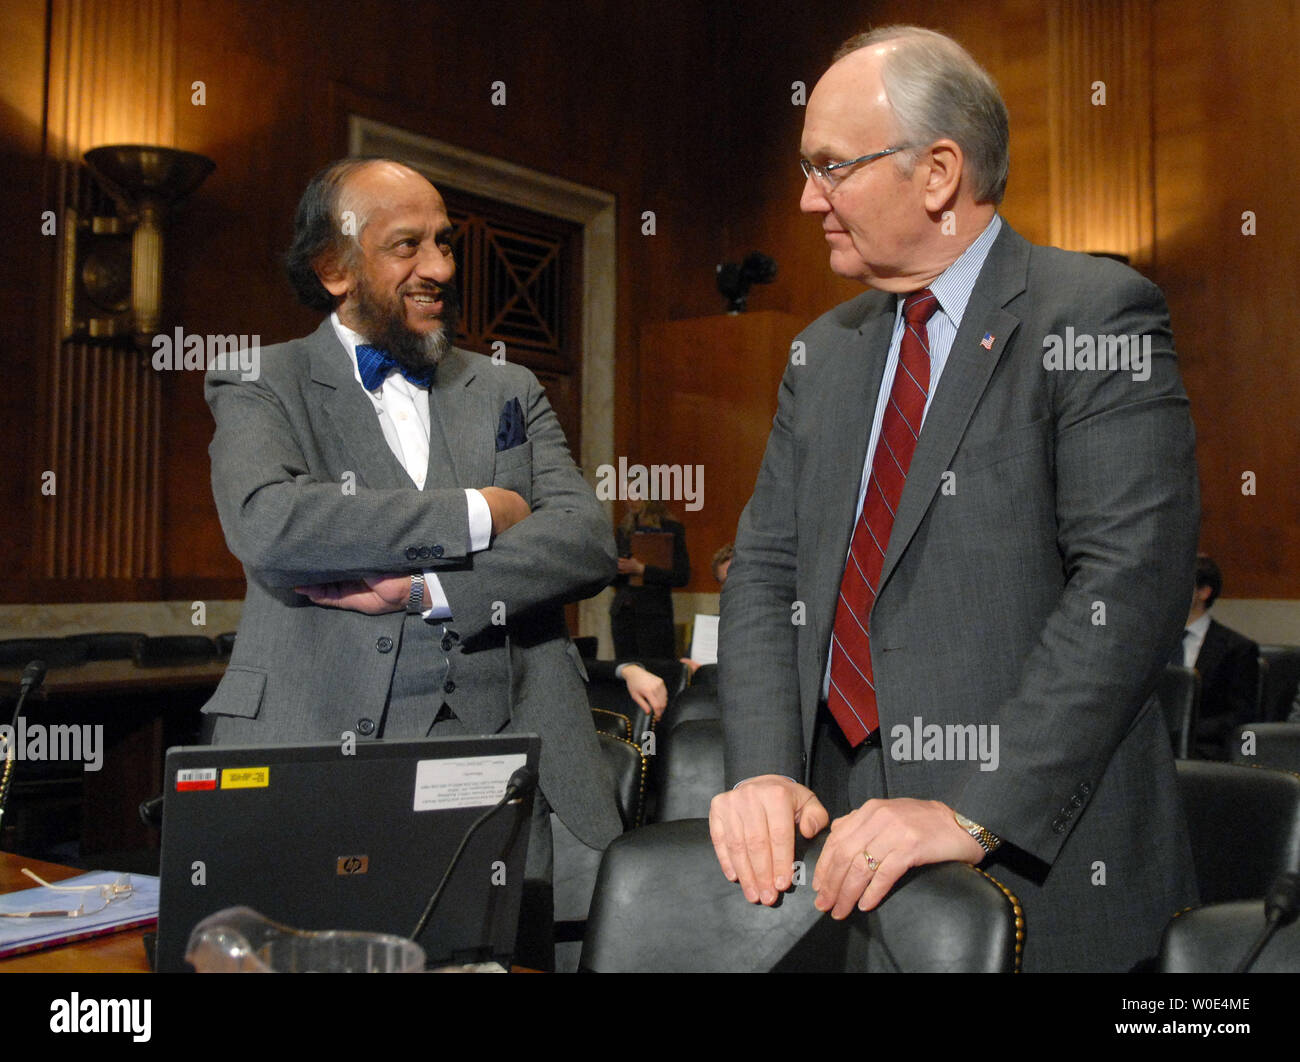 Rajenda Pachauri (L), chairman of the United Nation's Intergovernmental Panel on Climate Change, talks to Sen. Larry Craig (R-ID) prior to a Senate Environment and Public Works Committee hearing on global warming in Washington on January 30, 2008. (UPI Photo/Kevin Dietsch) Stock Photo